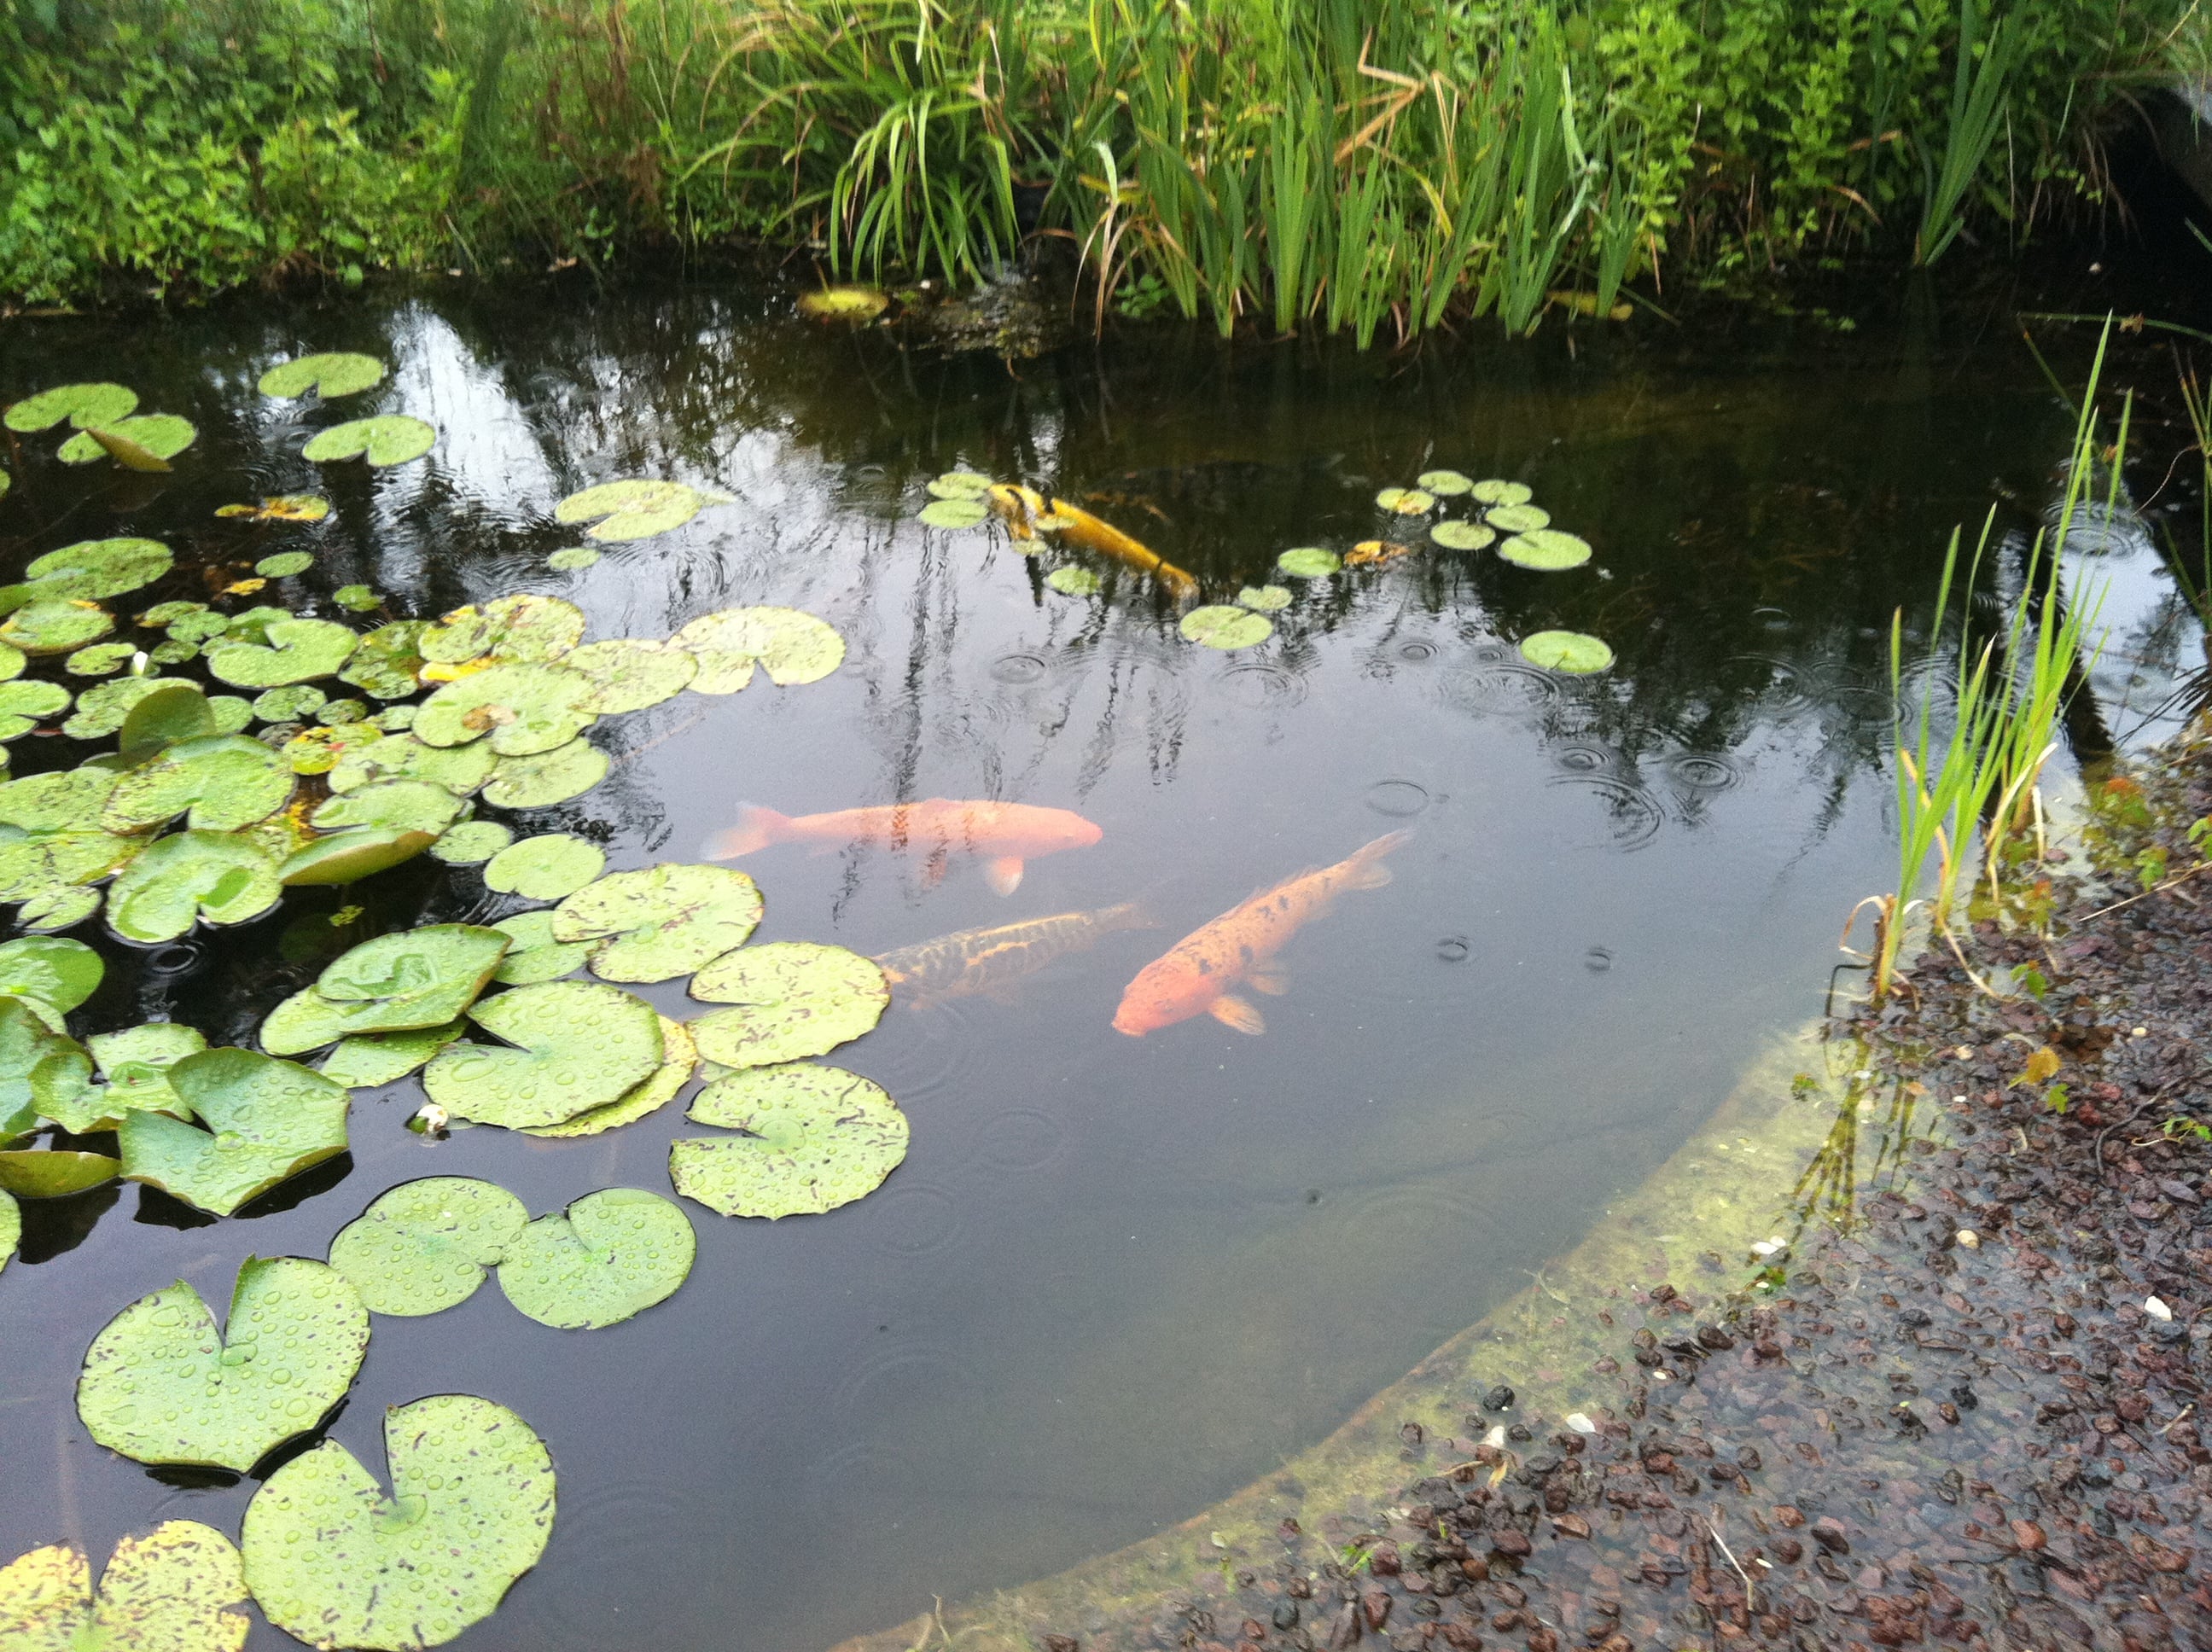 Residential and Koi ponds